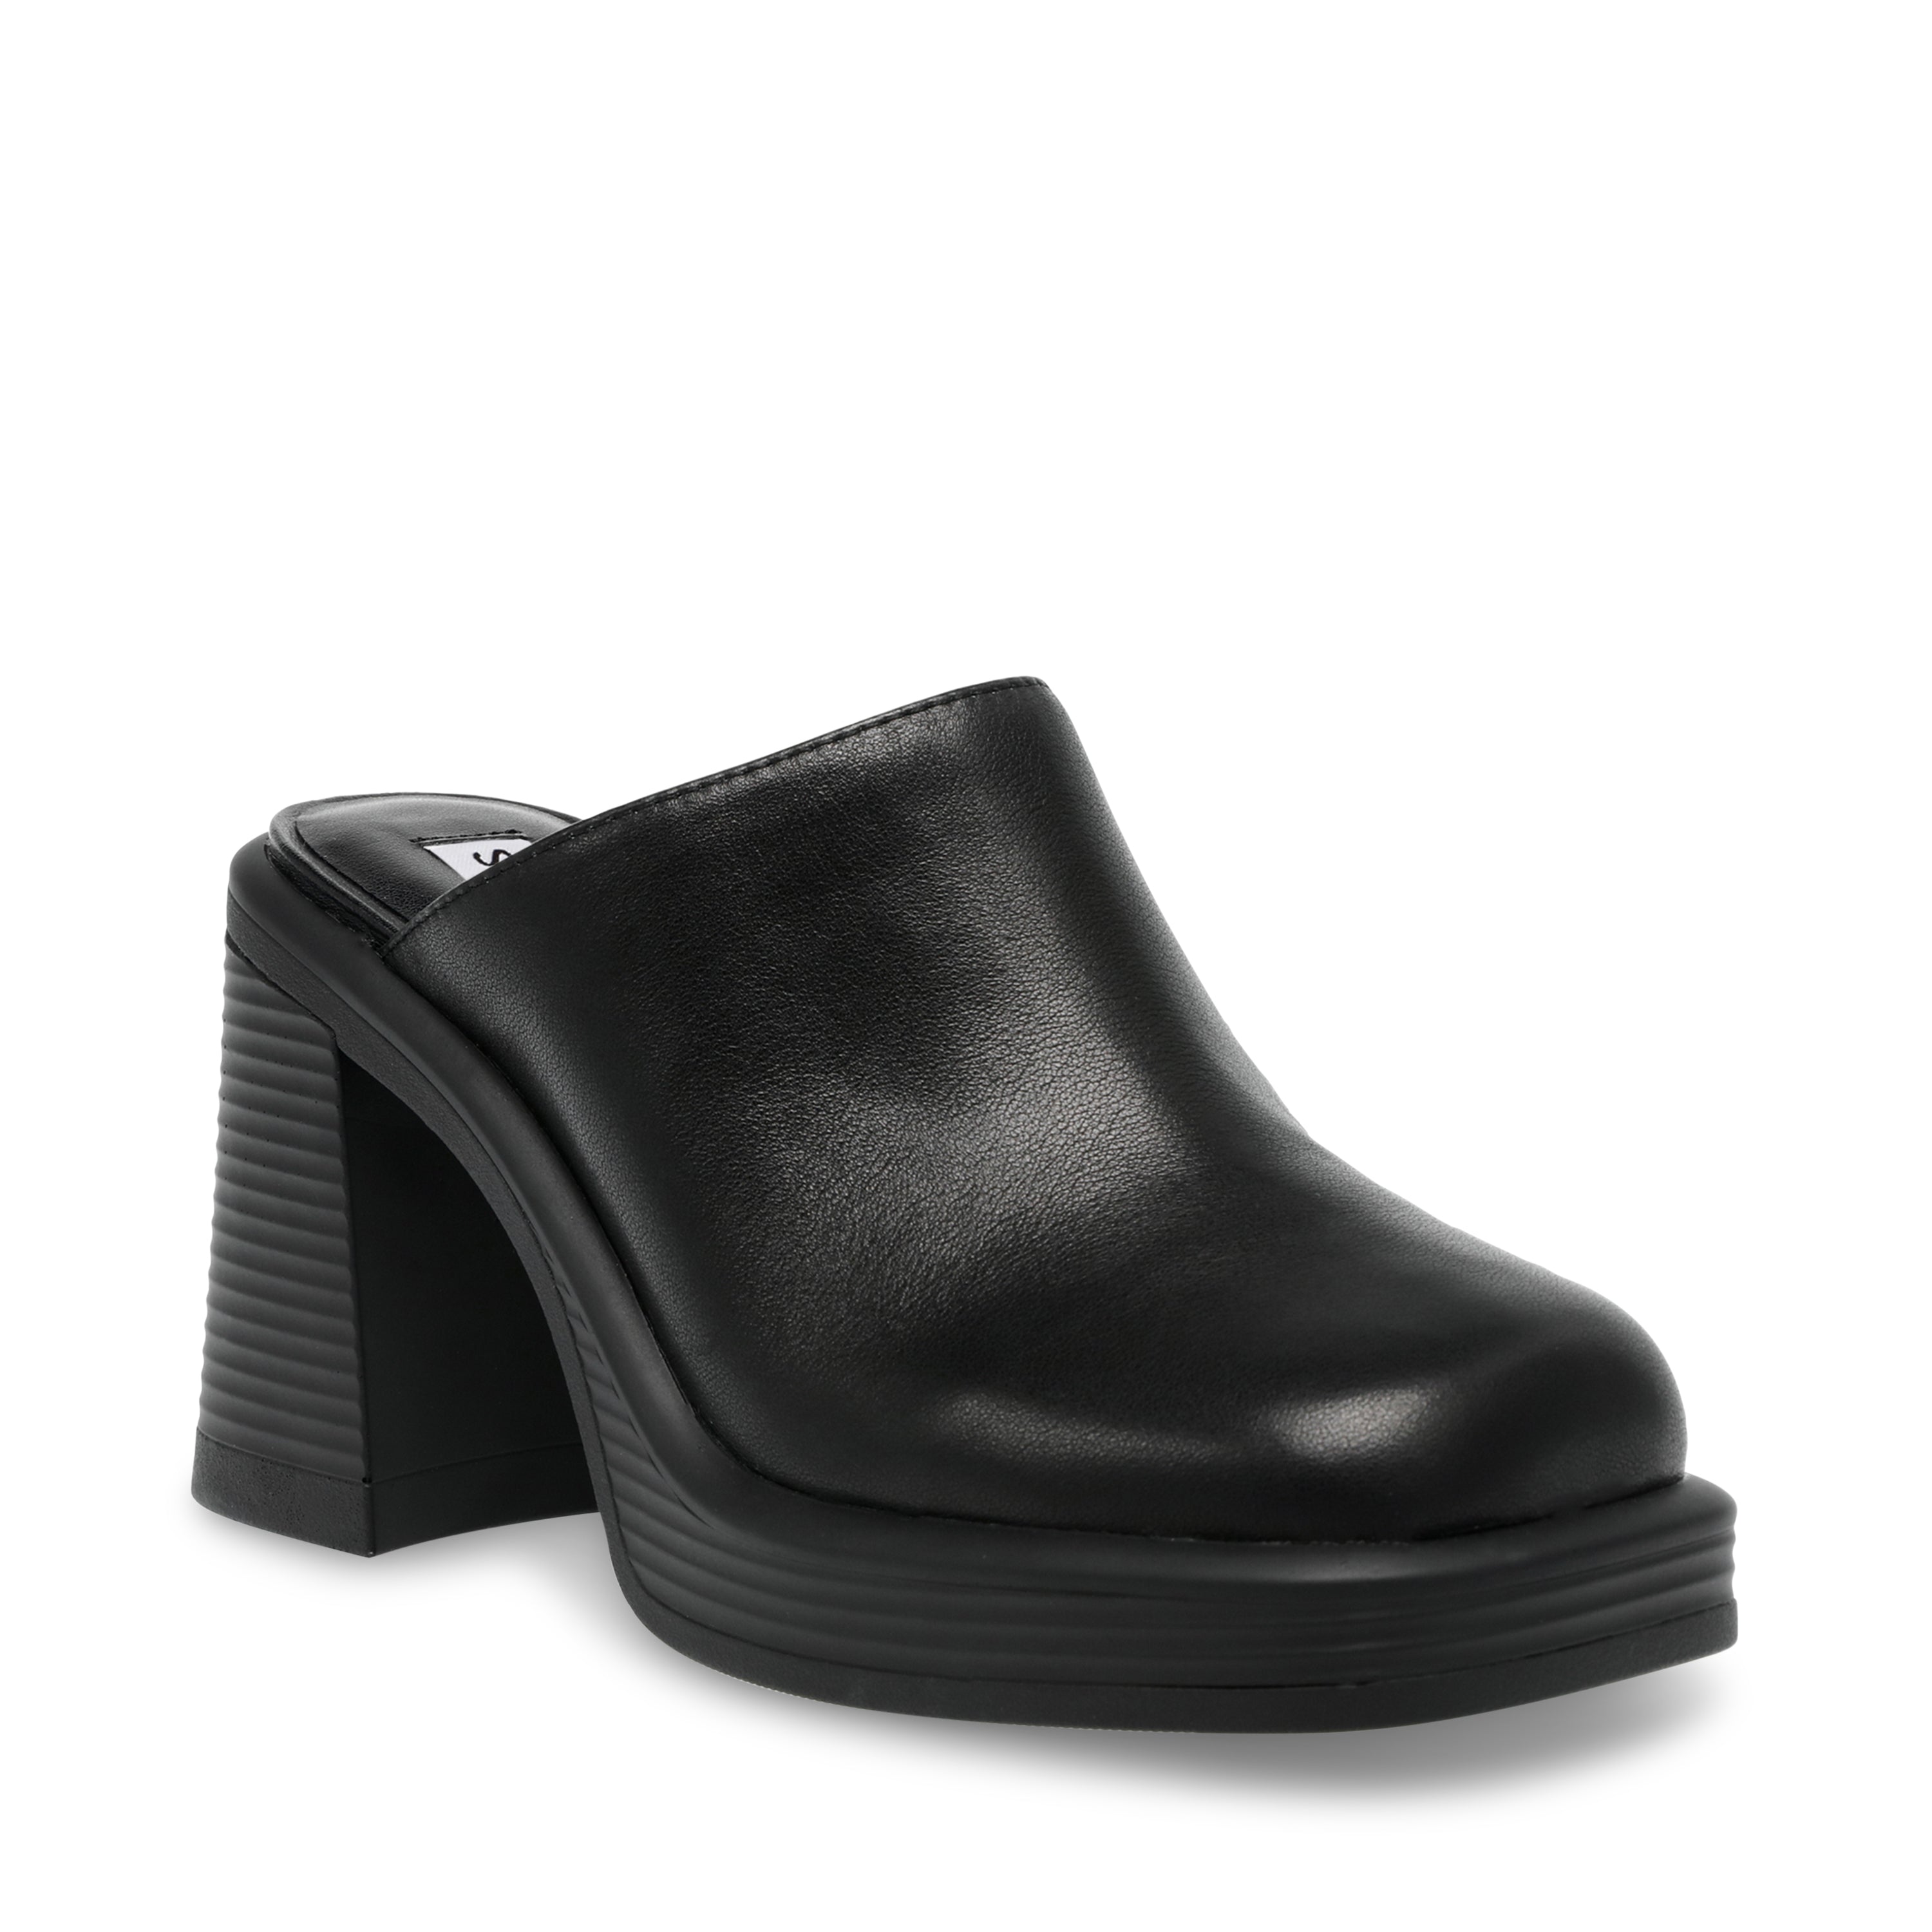 Foresight Mule BLACK LEATHER- Hover Image